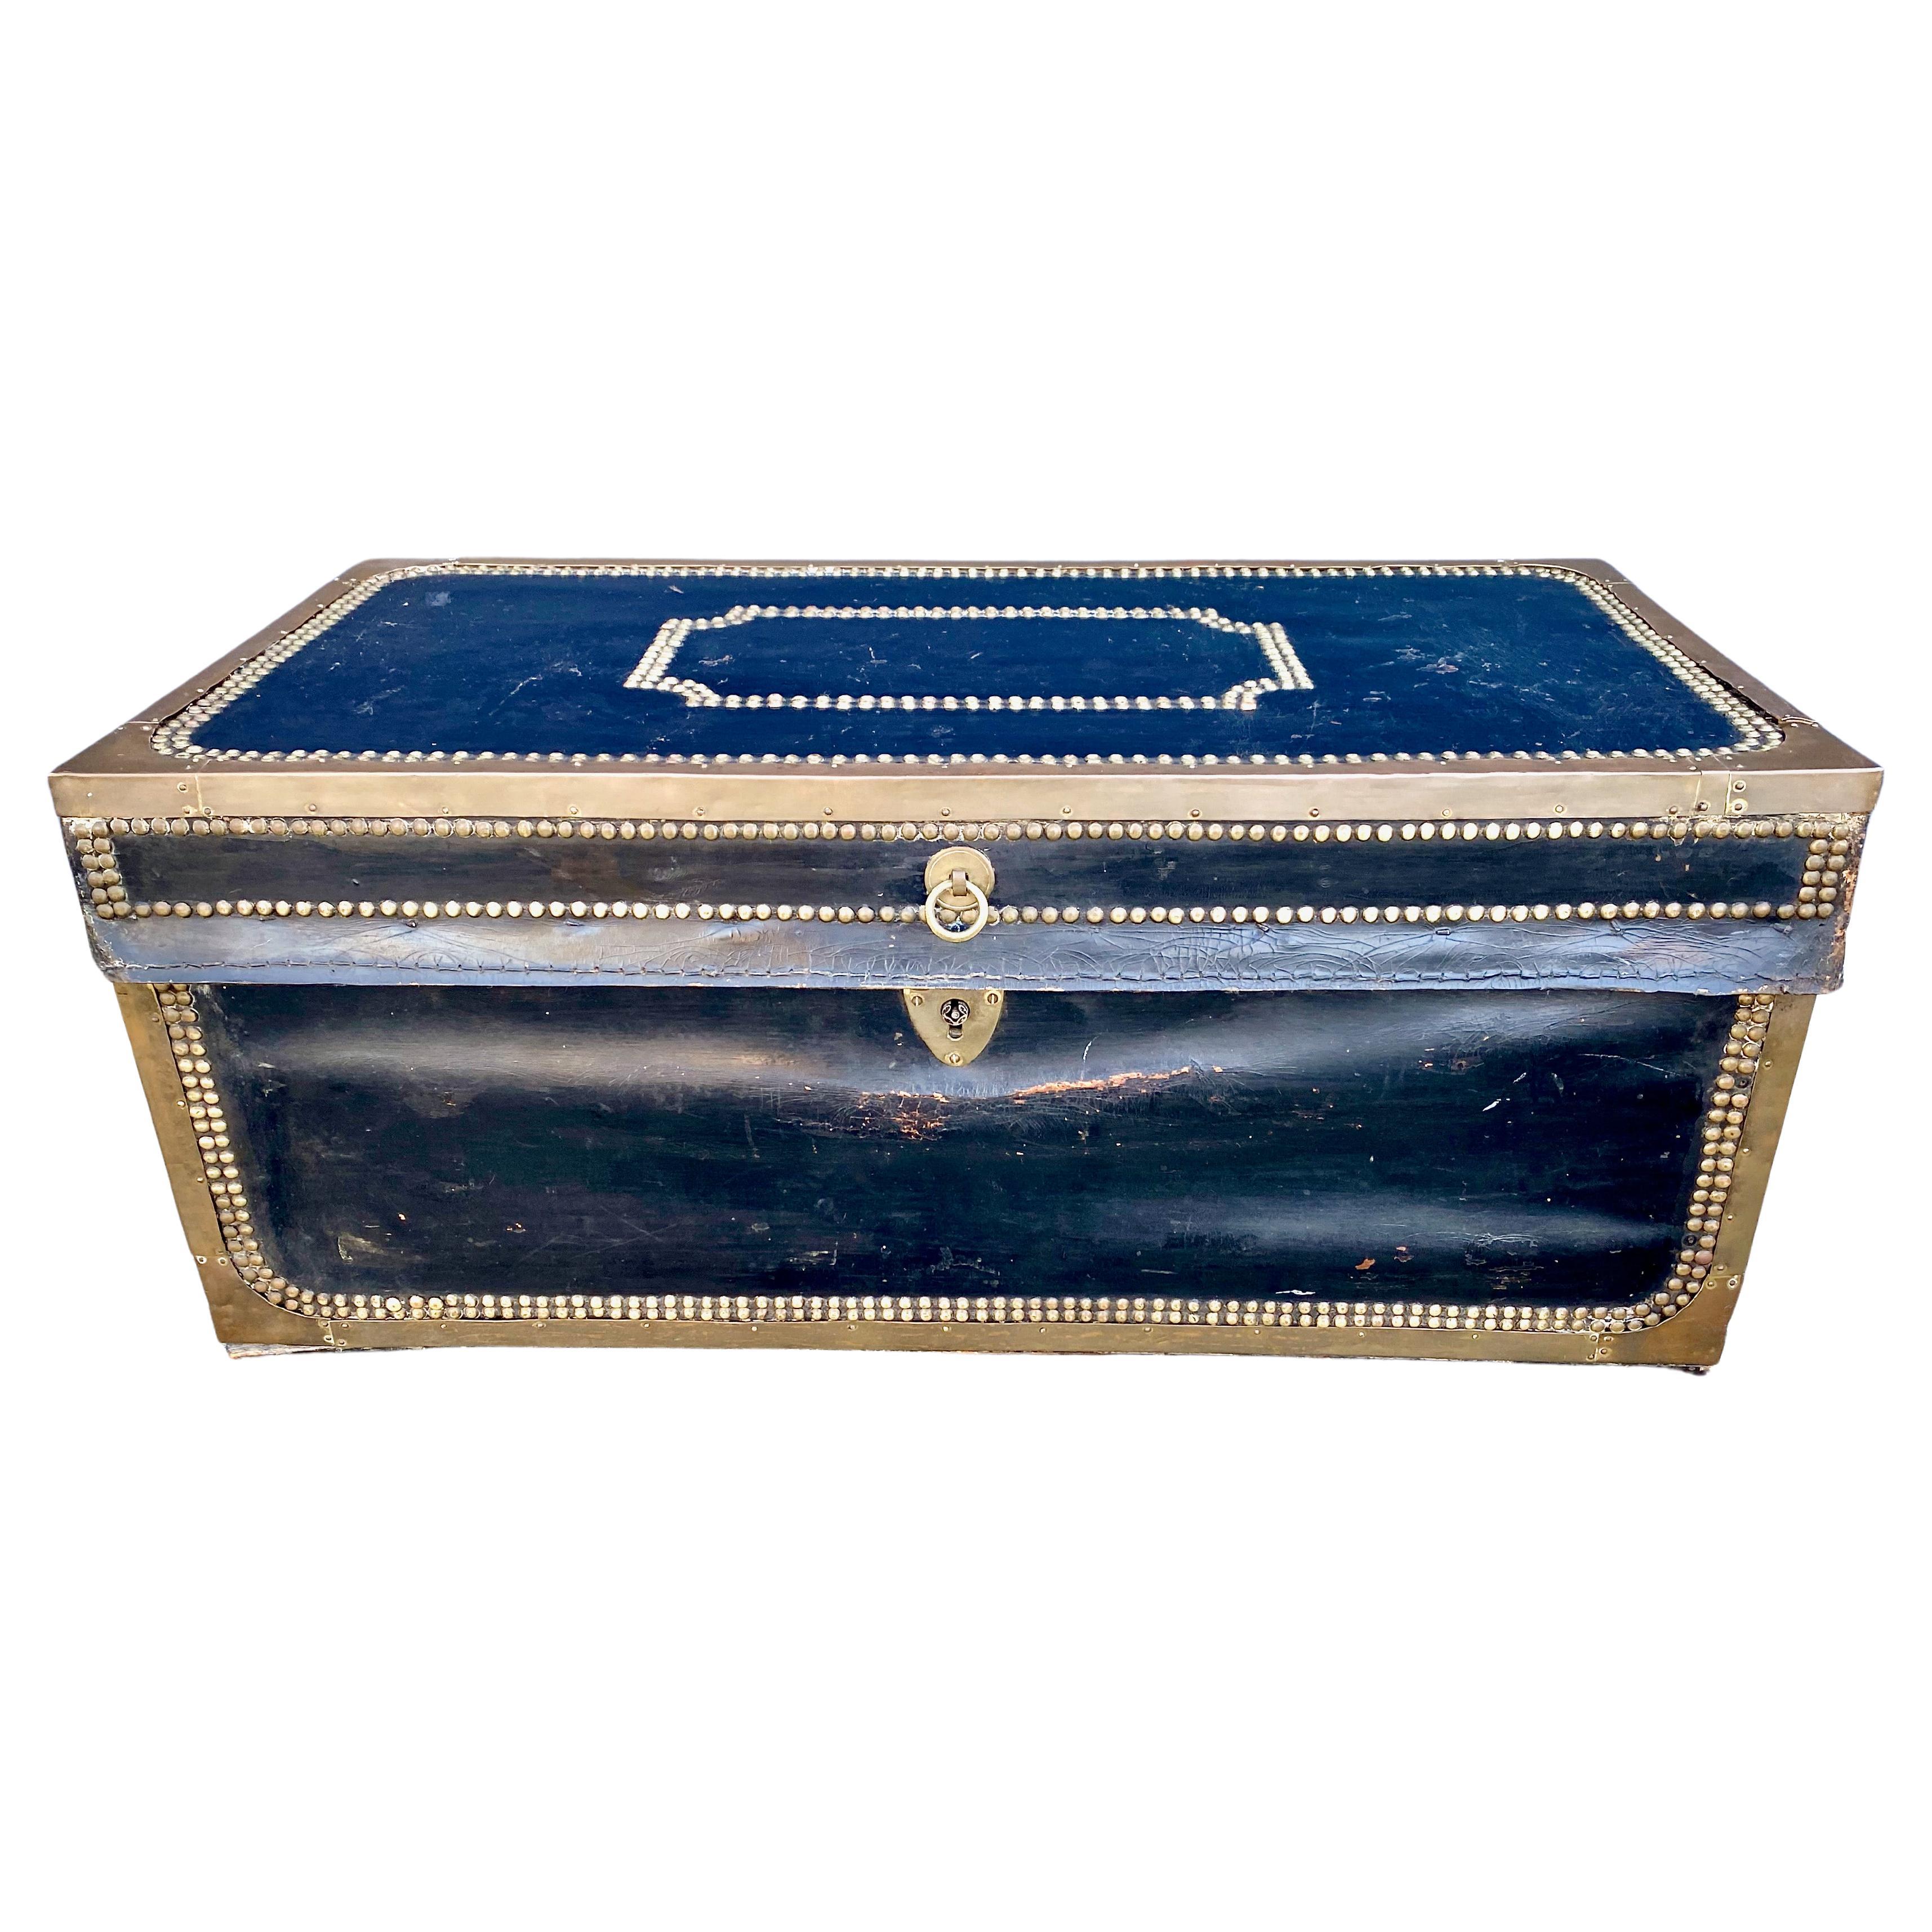 English Leather Bound Campaign Trunk, c. 1820-1830